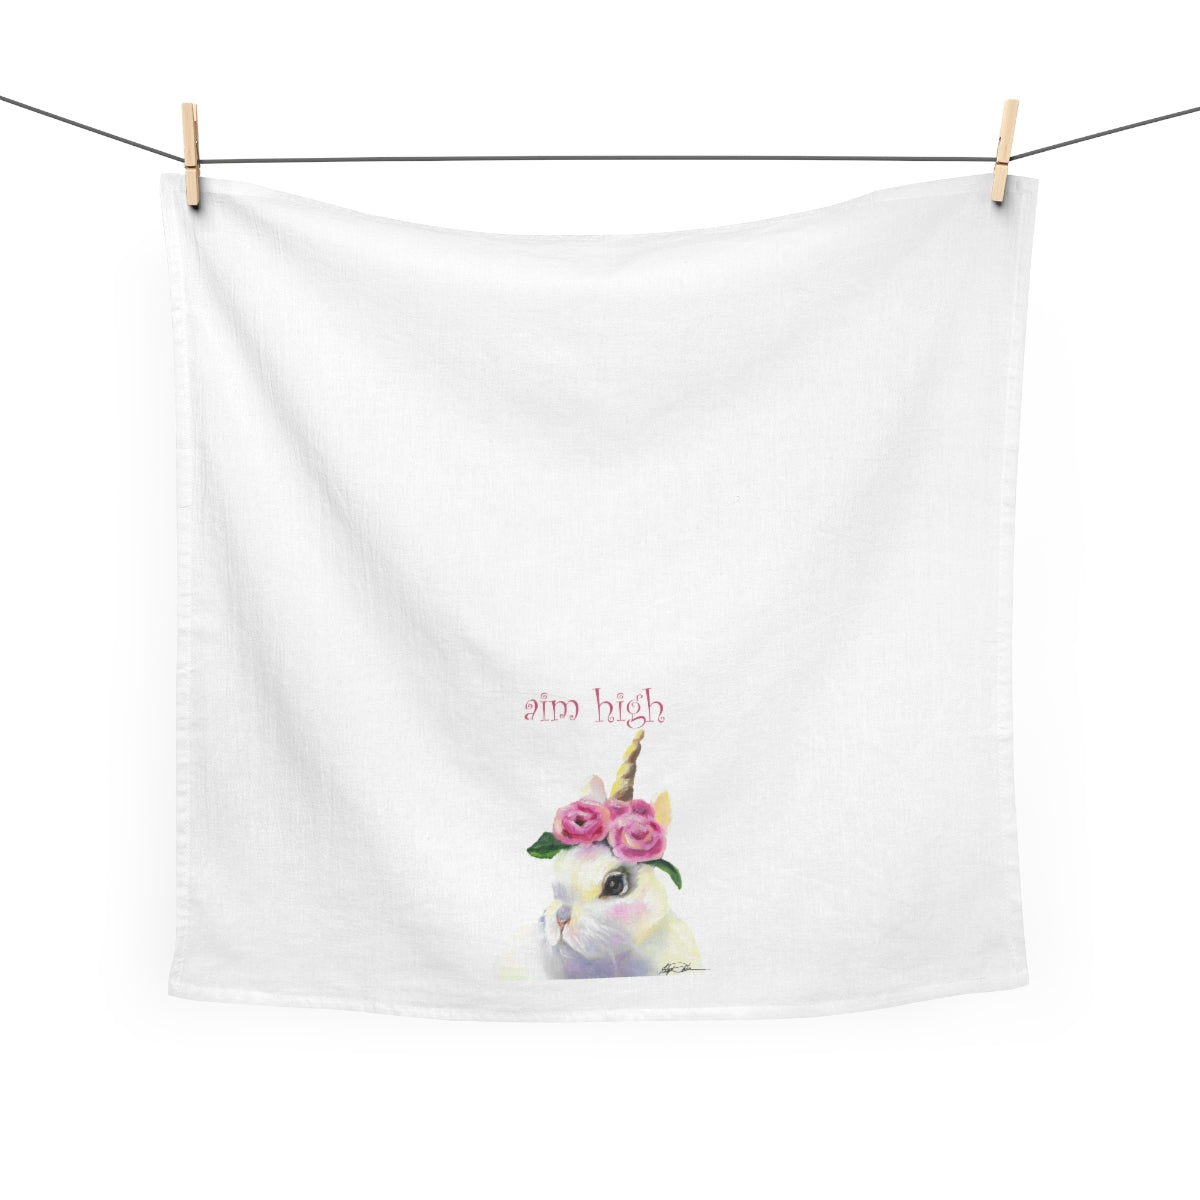 tea towel hanging on a clothes line